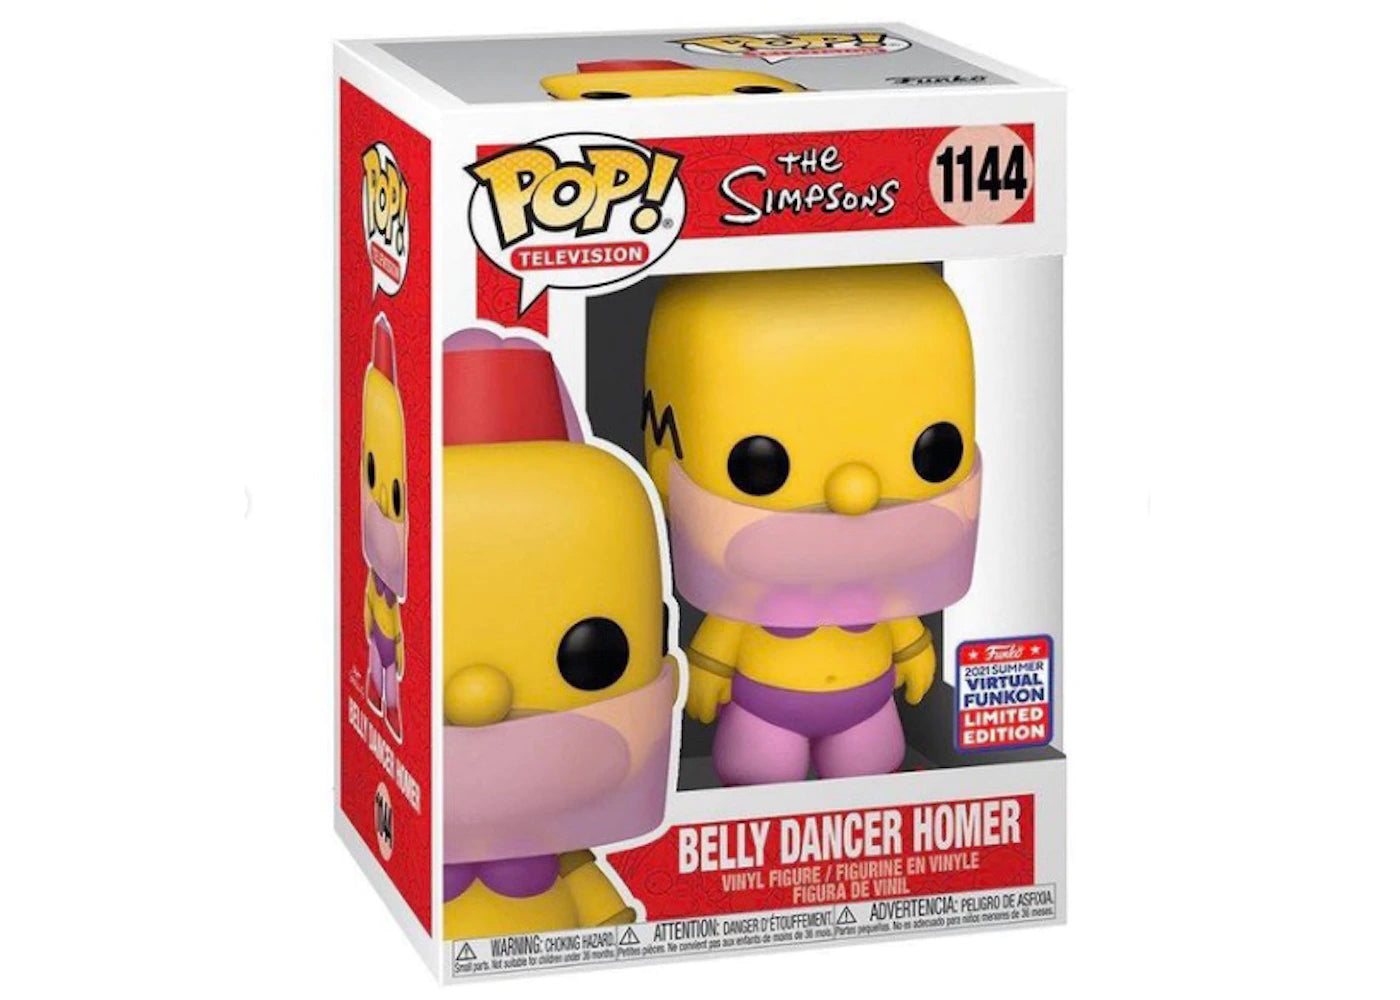 Pop! Television - The Simpsons - Belly Dancer Homer - #1144 - 2021 Summer Virtual Funkon LIMITED Edition